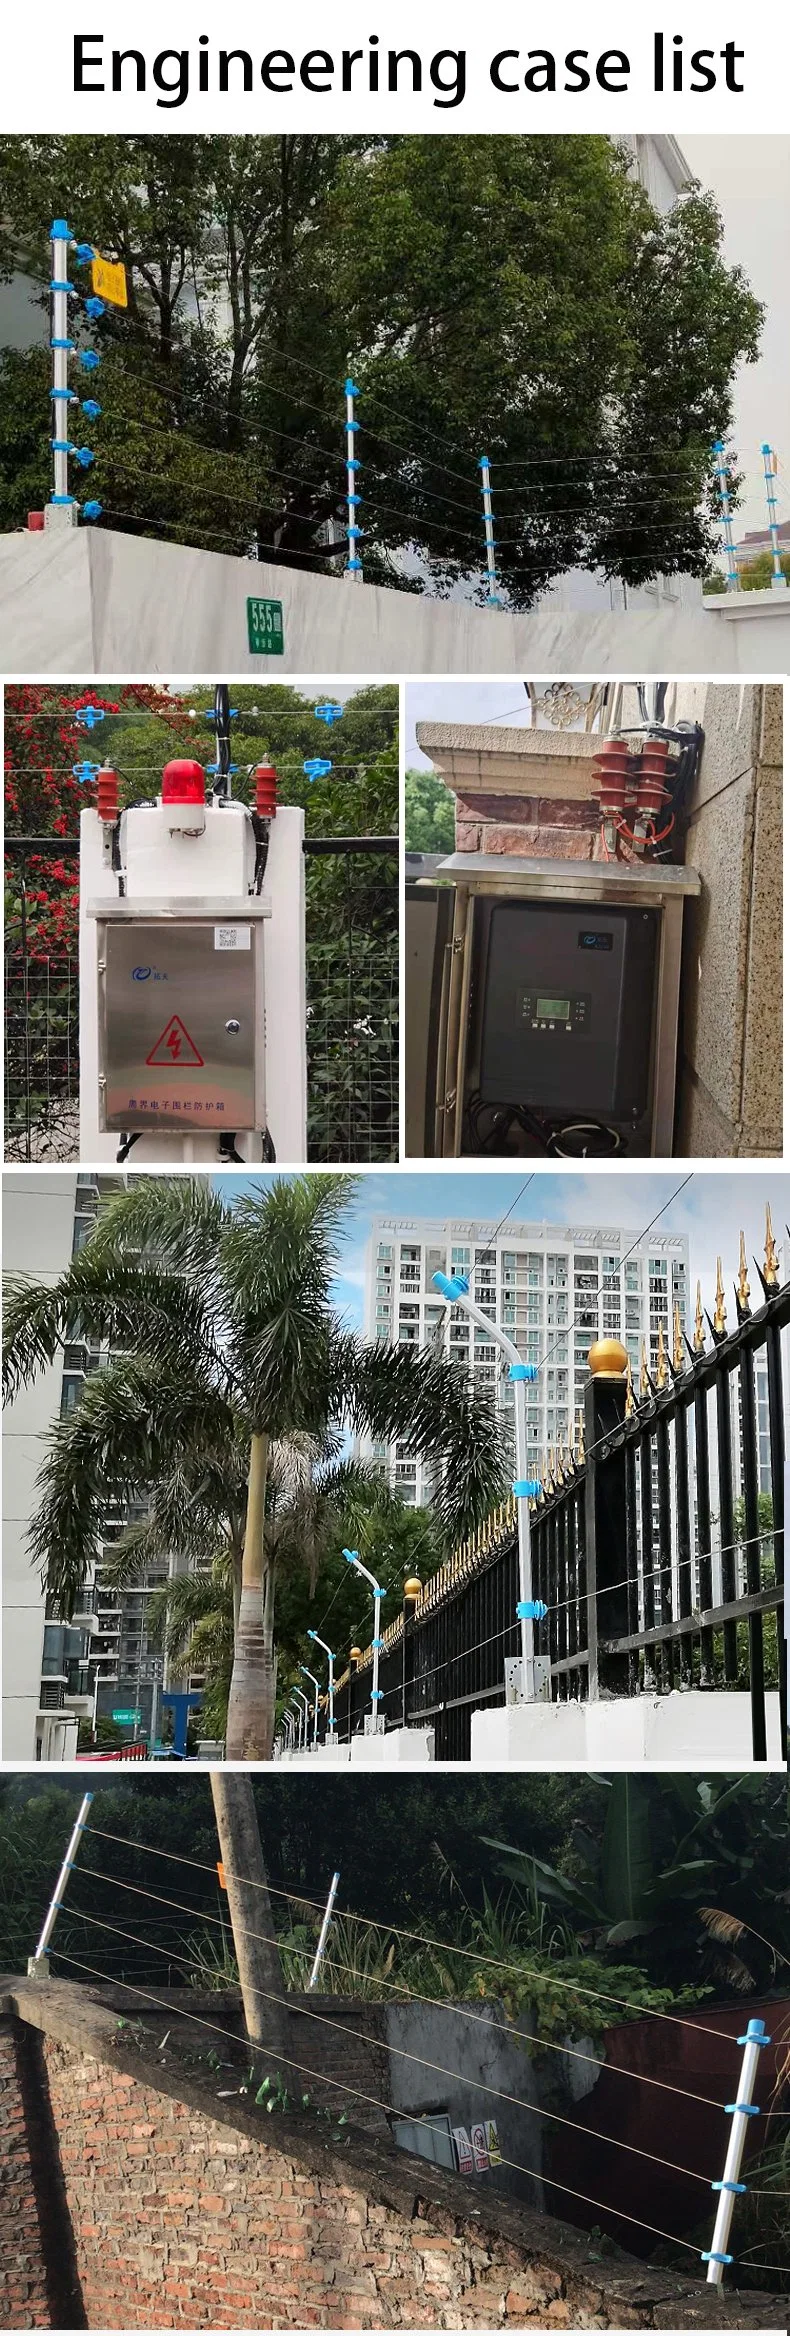 High Voltage Pulse Electric Fence Main Engine Complete Alarm System Single and Double Defense Zone Accessories Fence Guardrail Anti-Theft Power Grid